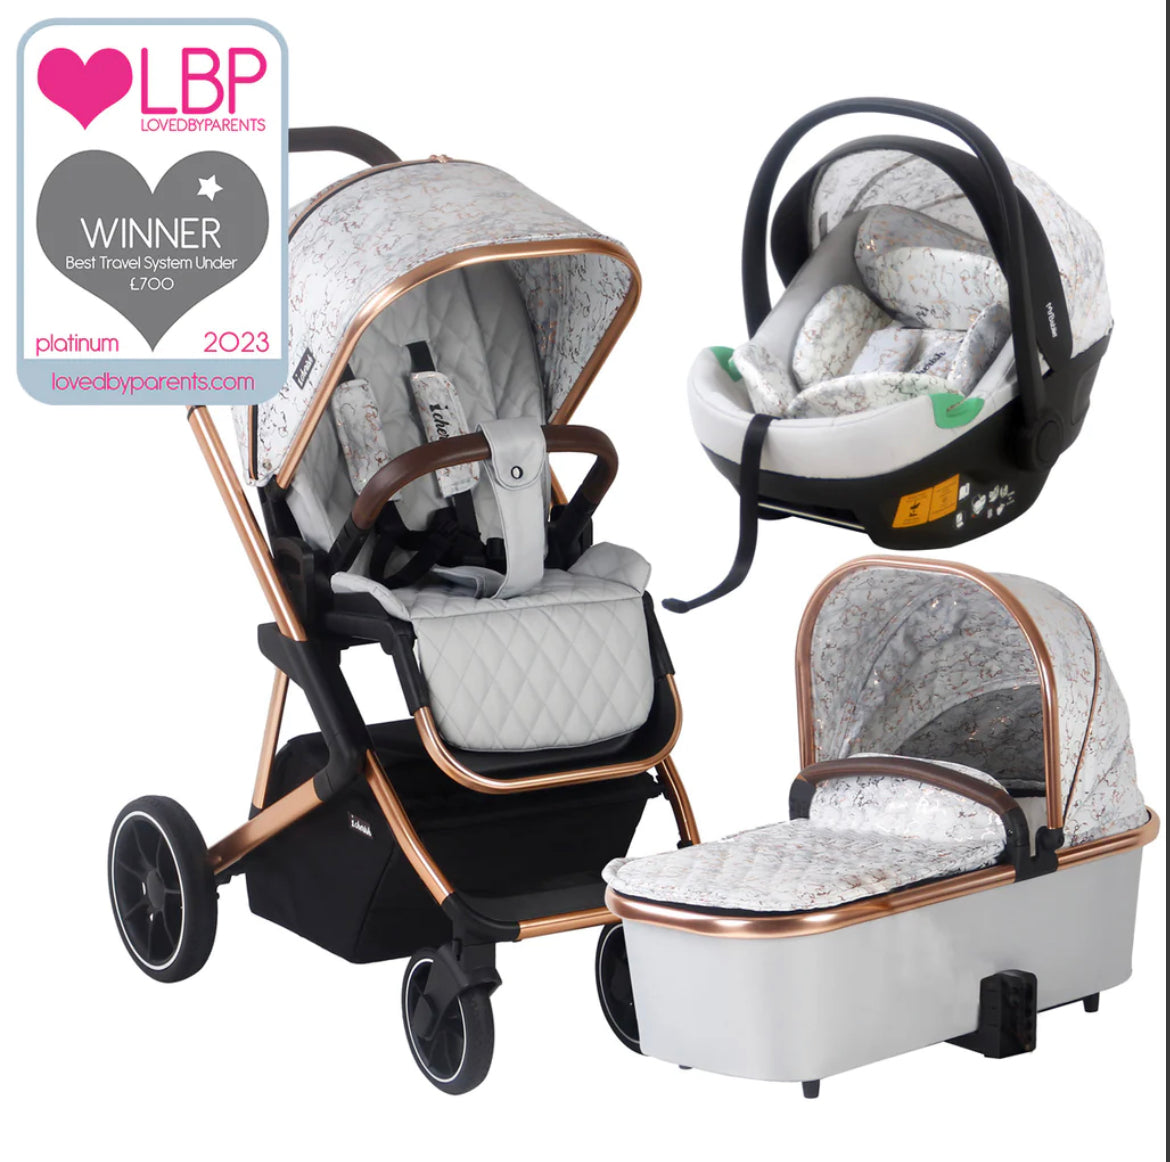 MB500i 3-in-1 Travel System with i-Size Car Seat - Dani Dyer Rose Gold Marble